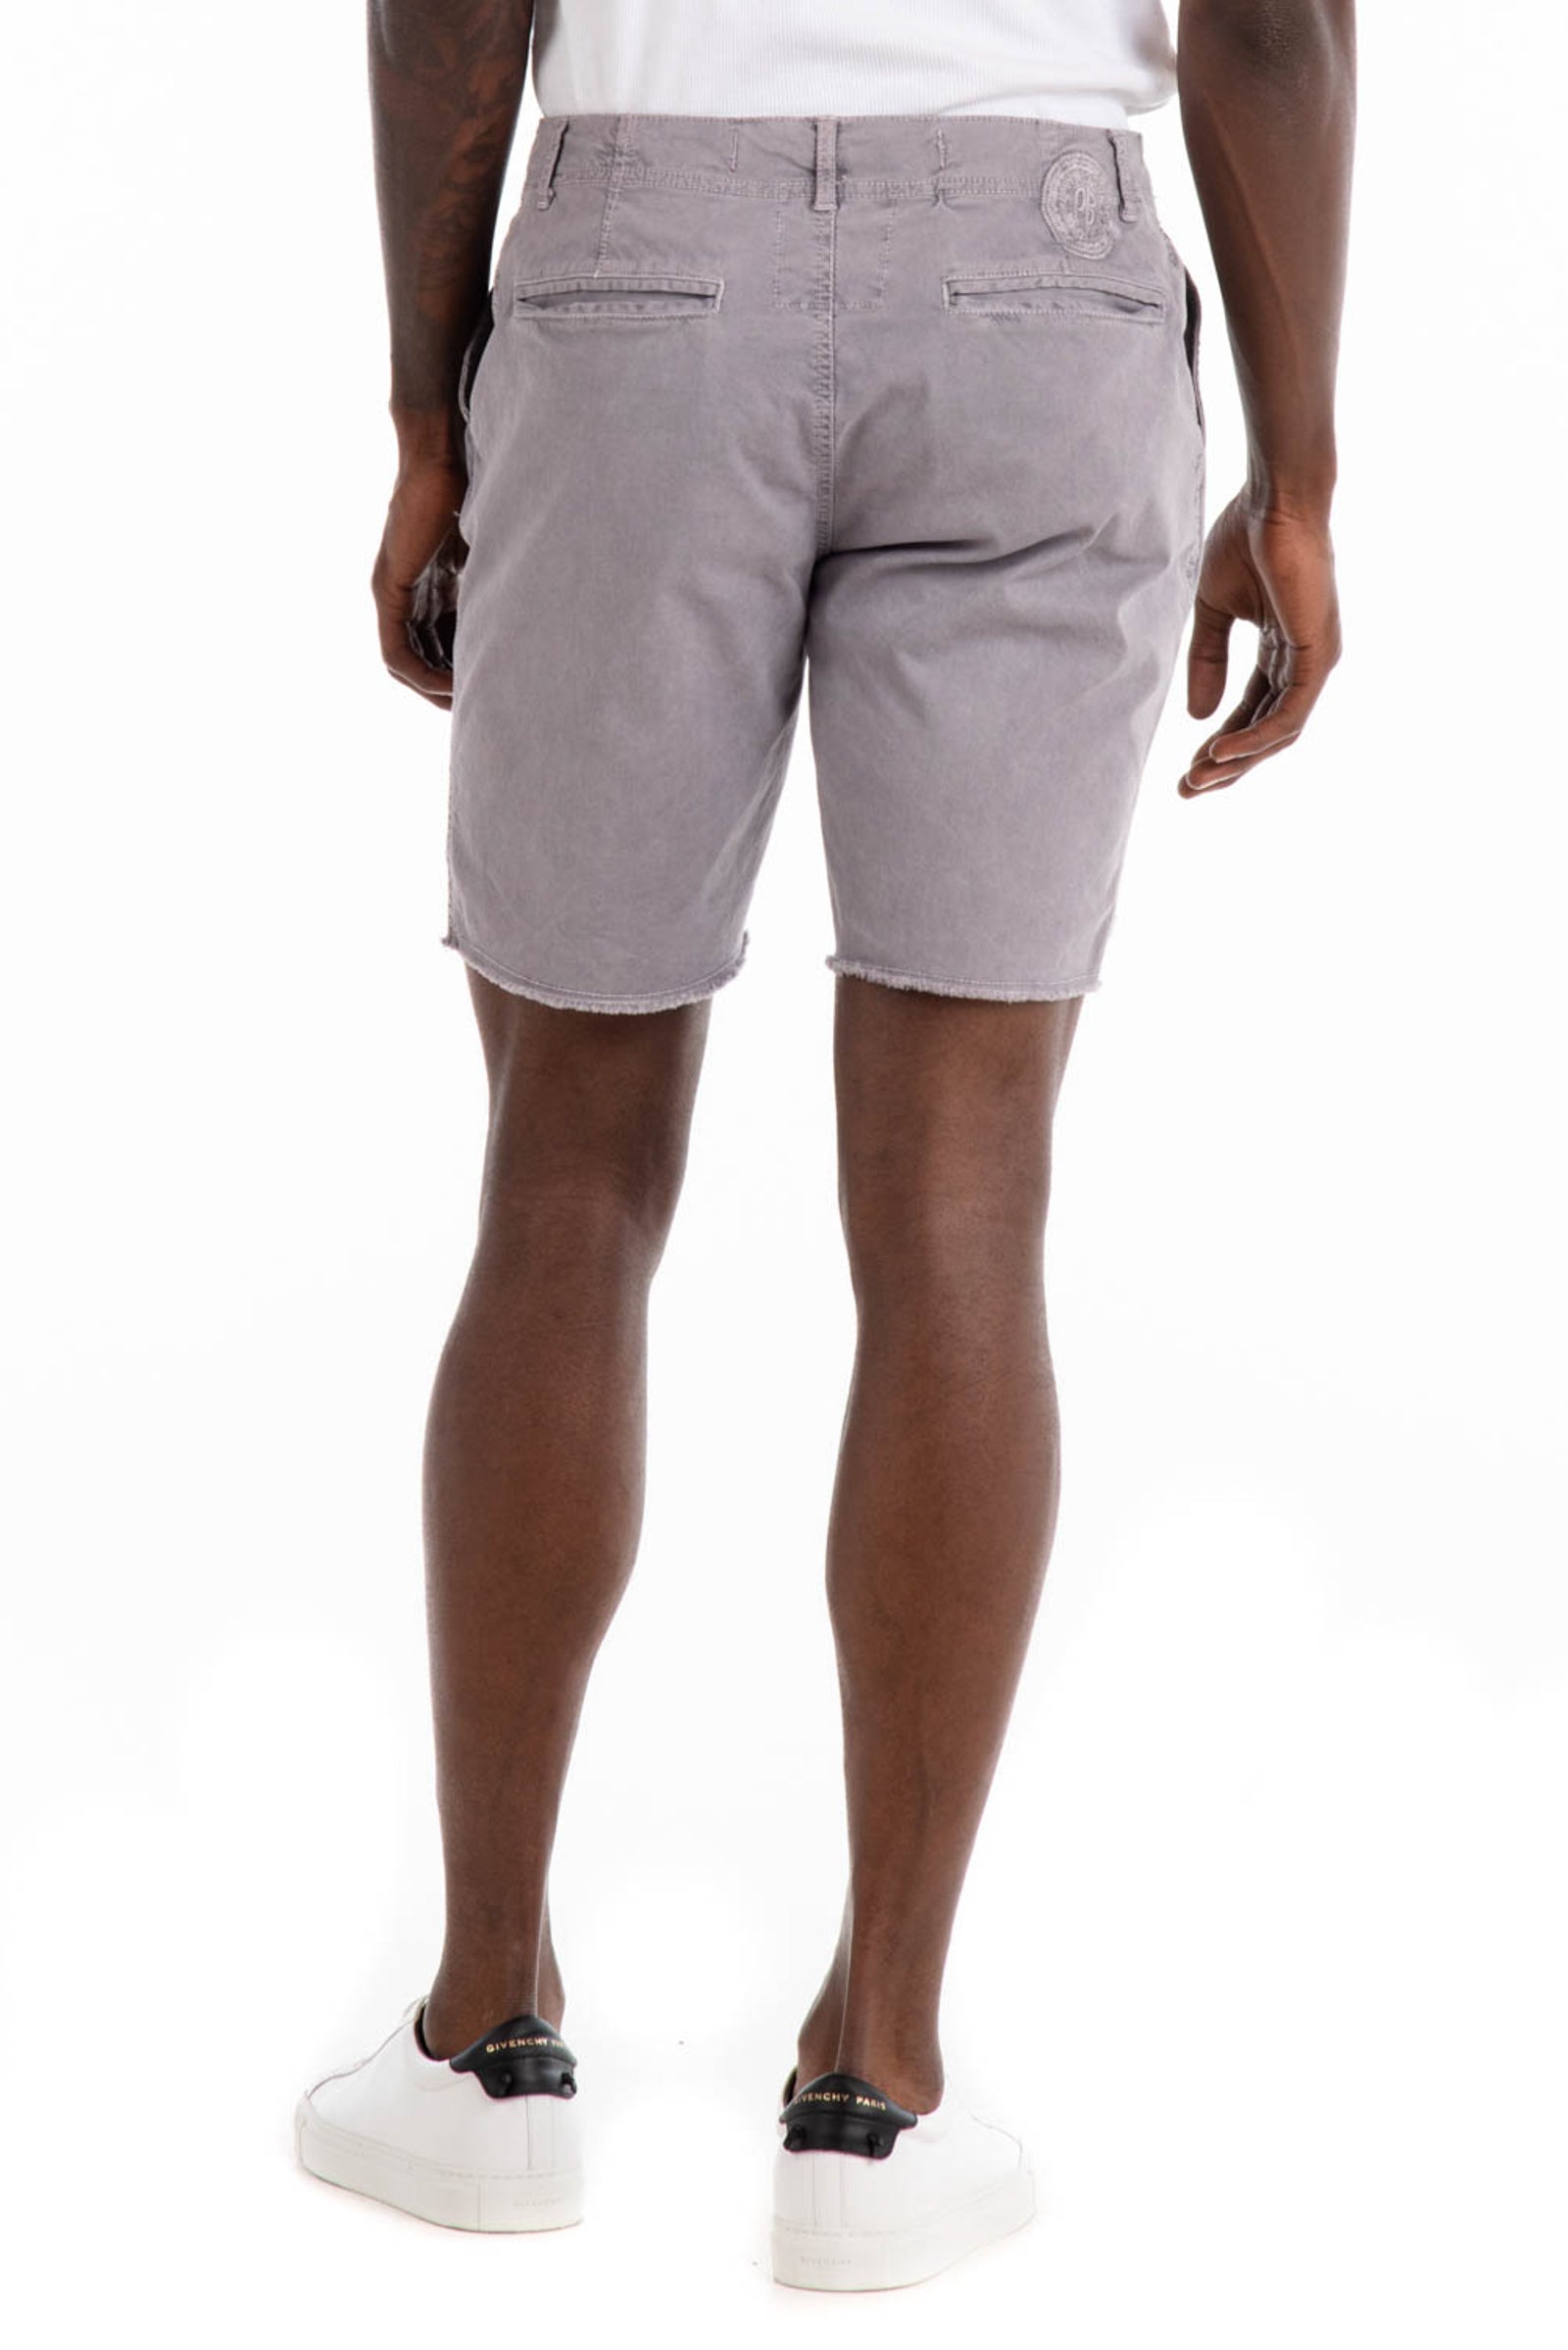 Original Paperbacks Brentwood Chino Short in Light Grey on Model Cropped Back View